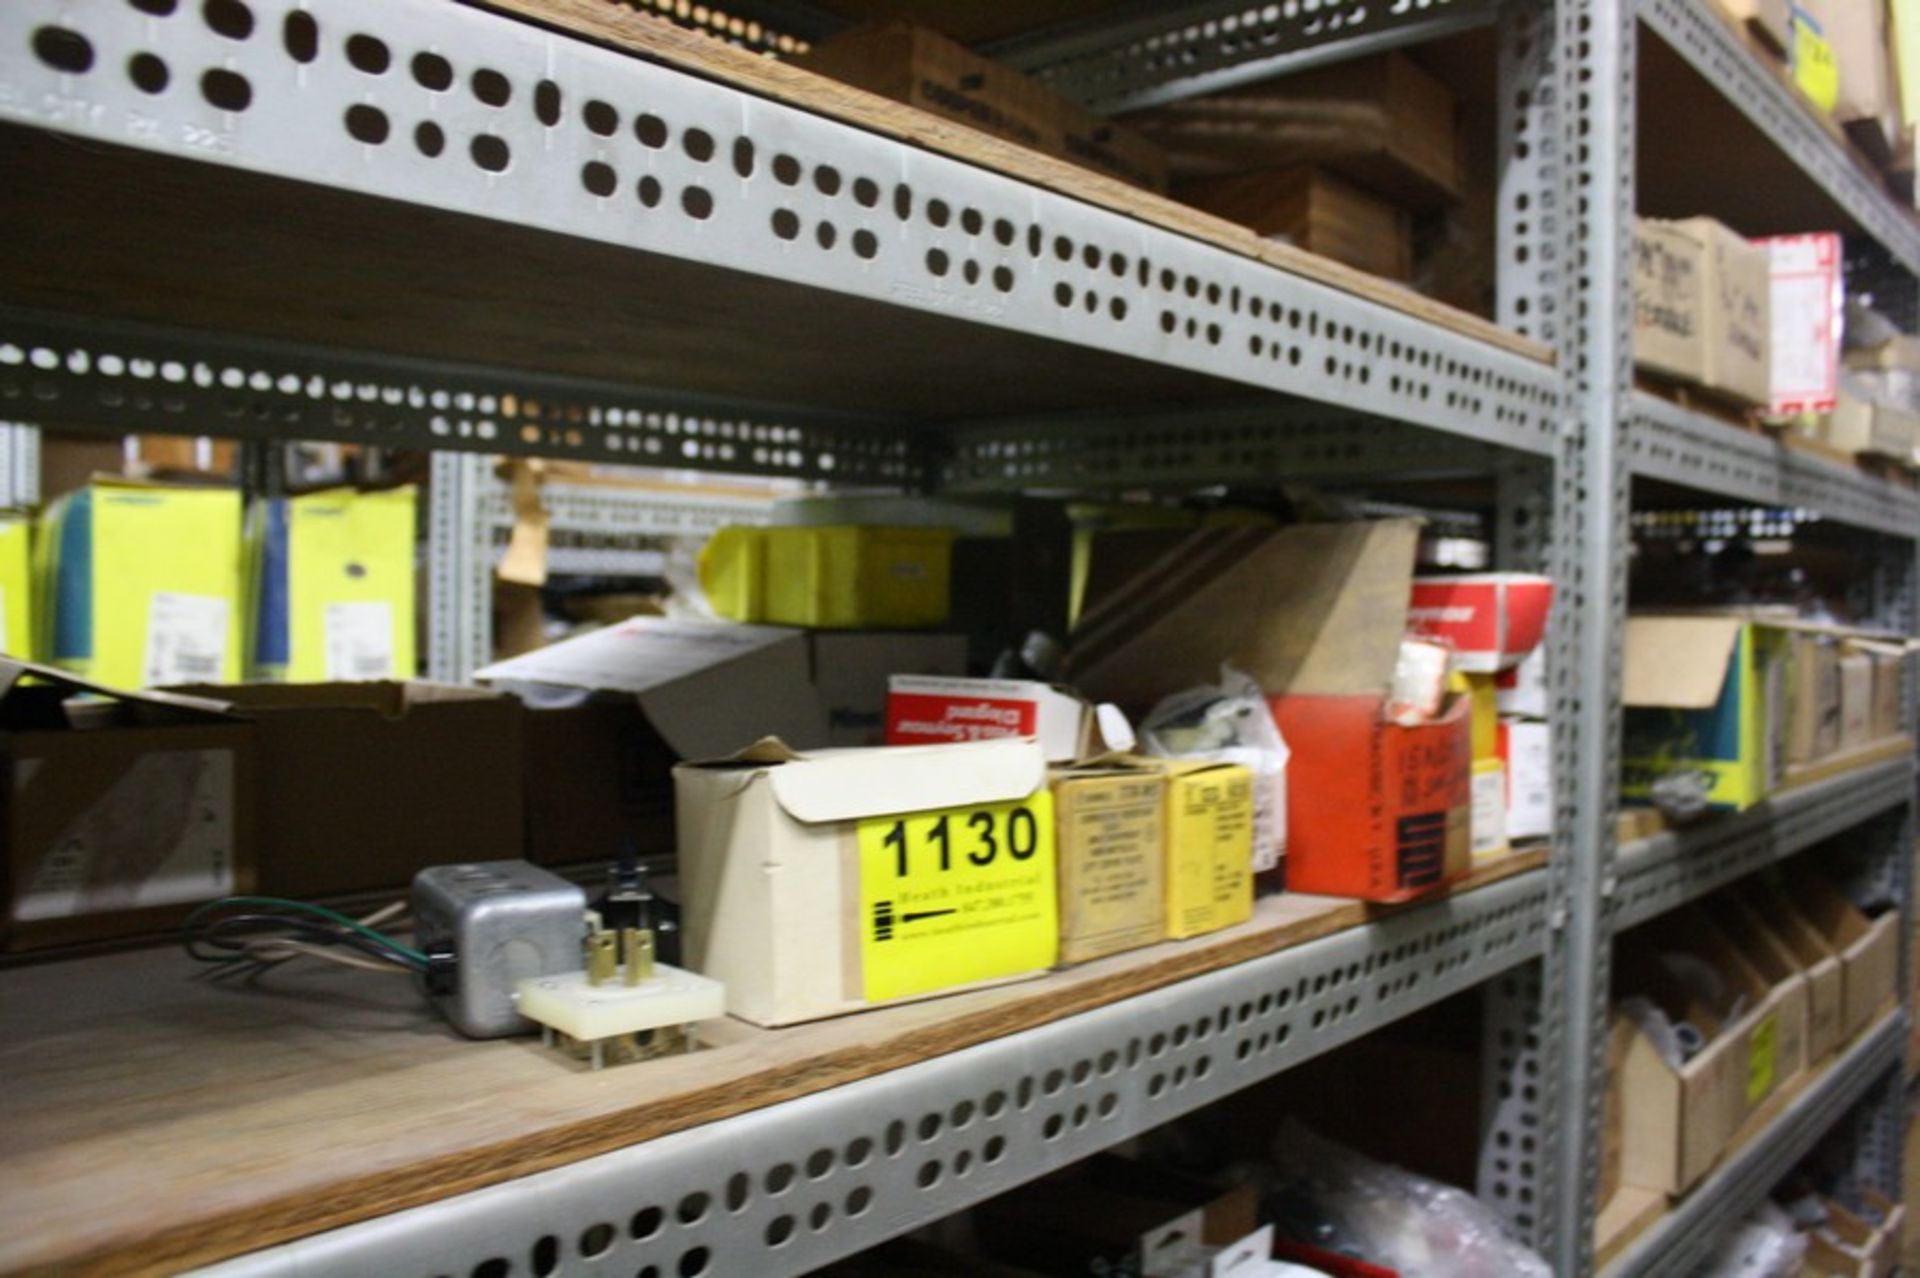 ASSORTED RECEPTACLES AND PLUGS ON SHELF